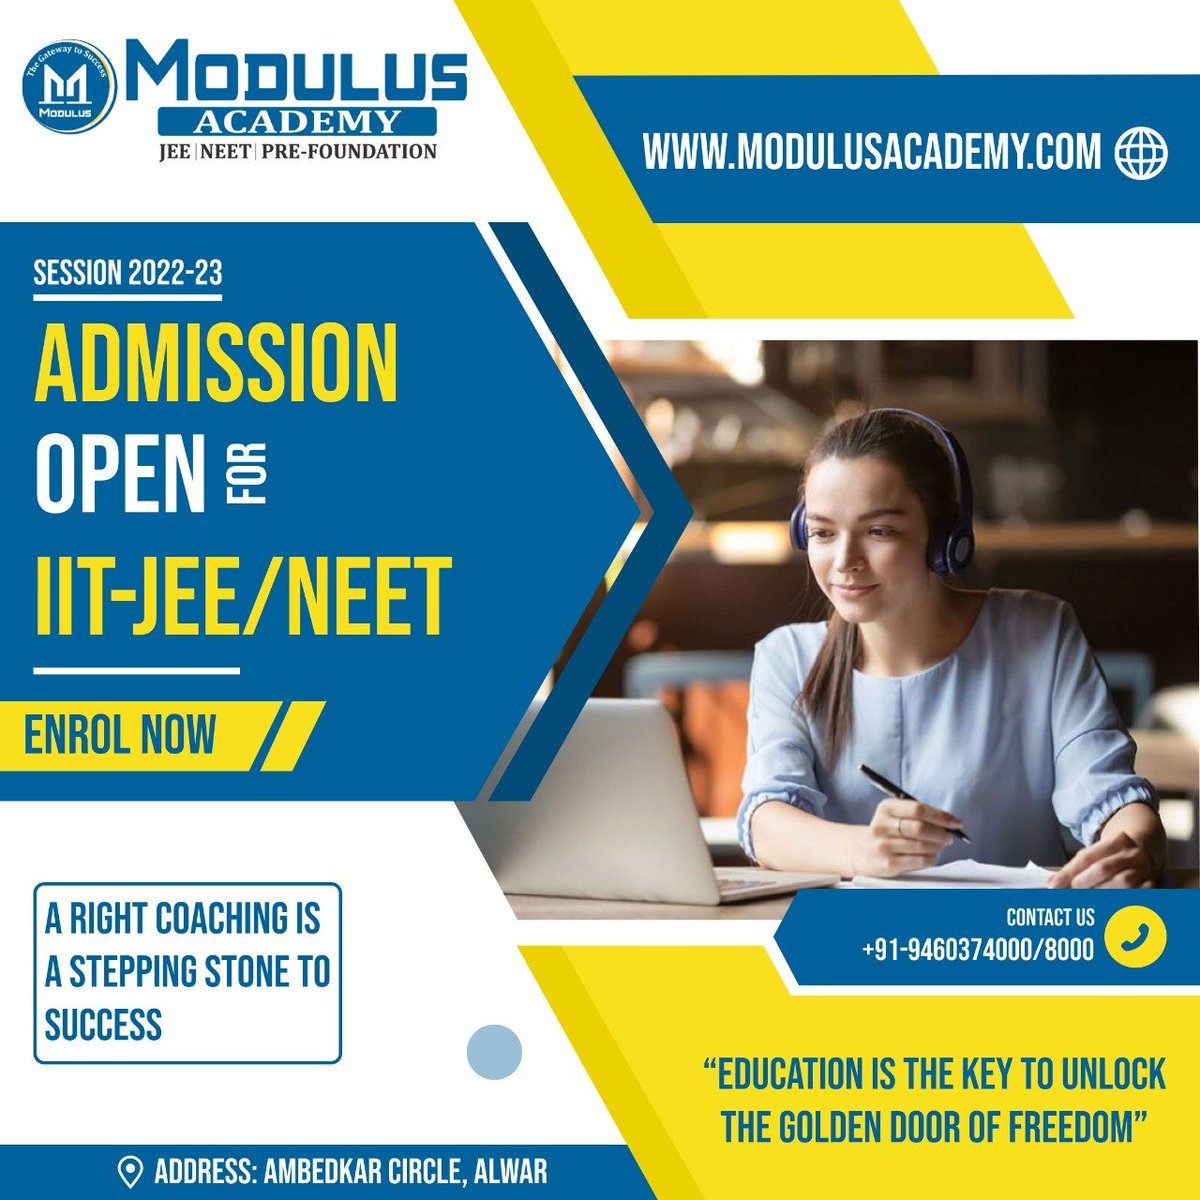 Education is  the key to unlock the golden door of freedom
Register Today for IIT -JEE/NEET
Join Modulus for your better tomorrow
👉Admissions Are Still Open!
JOIN NOW: 🌐modulusacademy.com
Call for more info    📞 9460374000 📞 9460378000
#IIT #IITJEE #NEET #neetinstitute